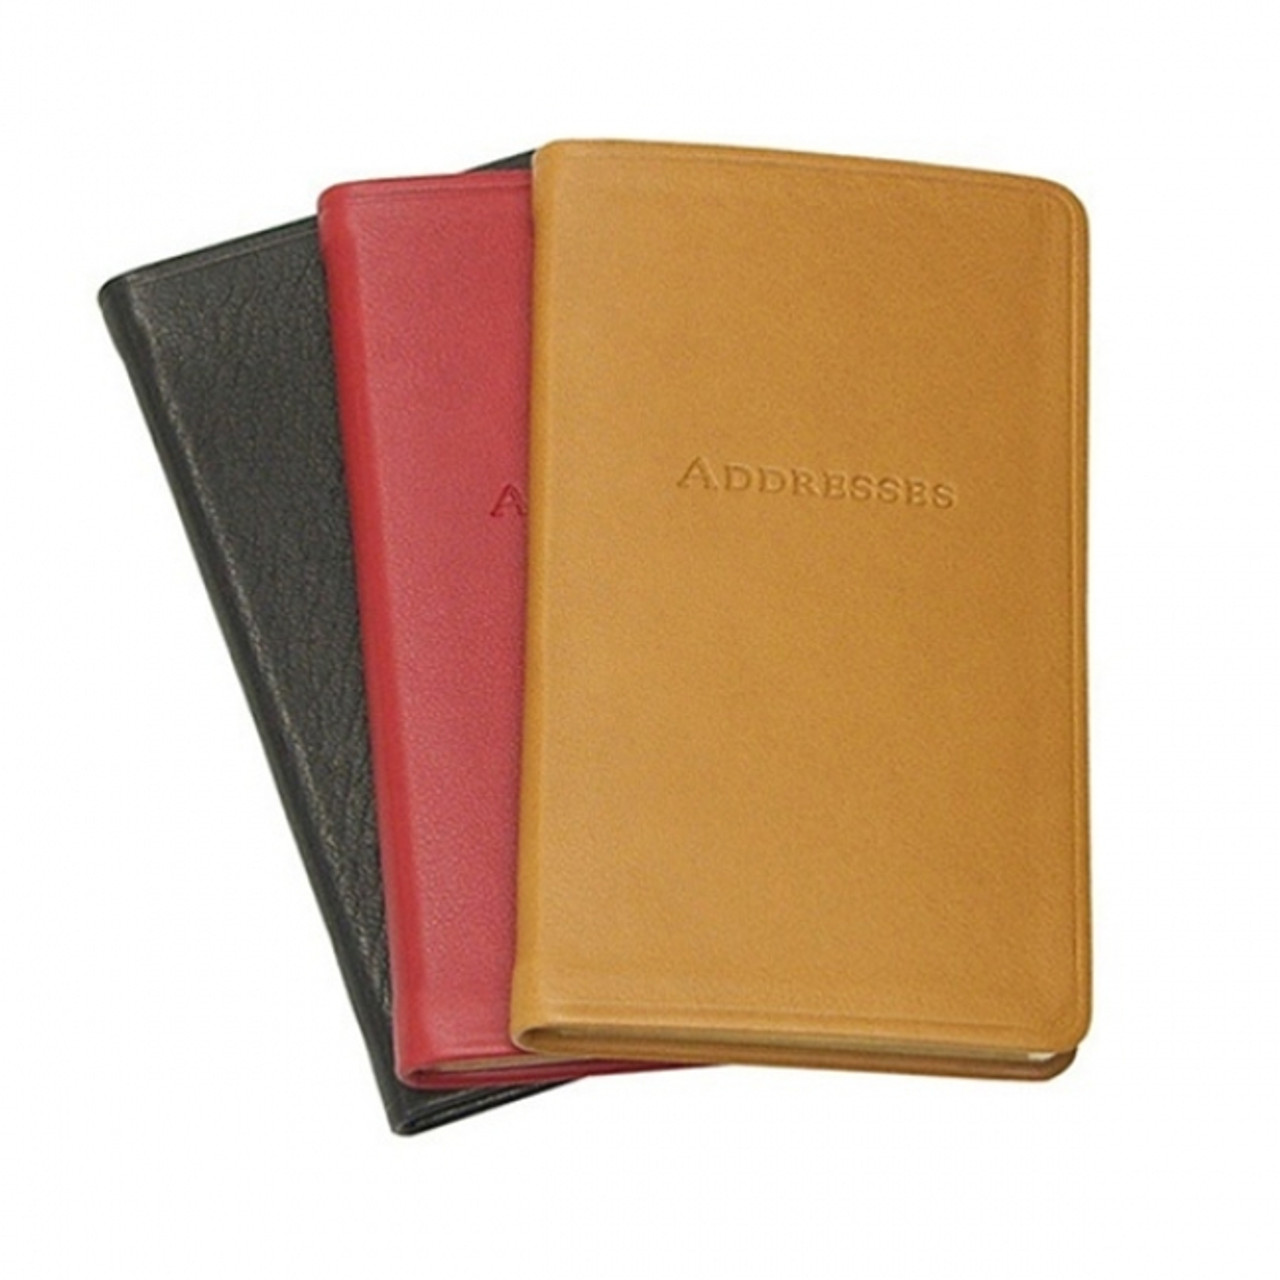 Graphic Image: New Leather Bound Books By Graphic Image At